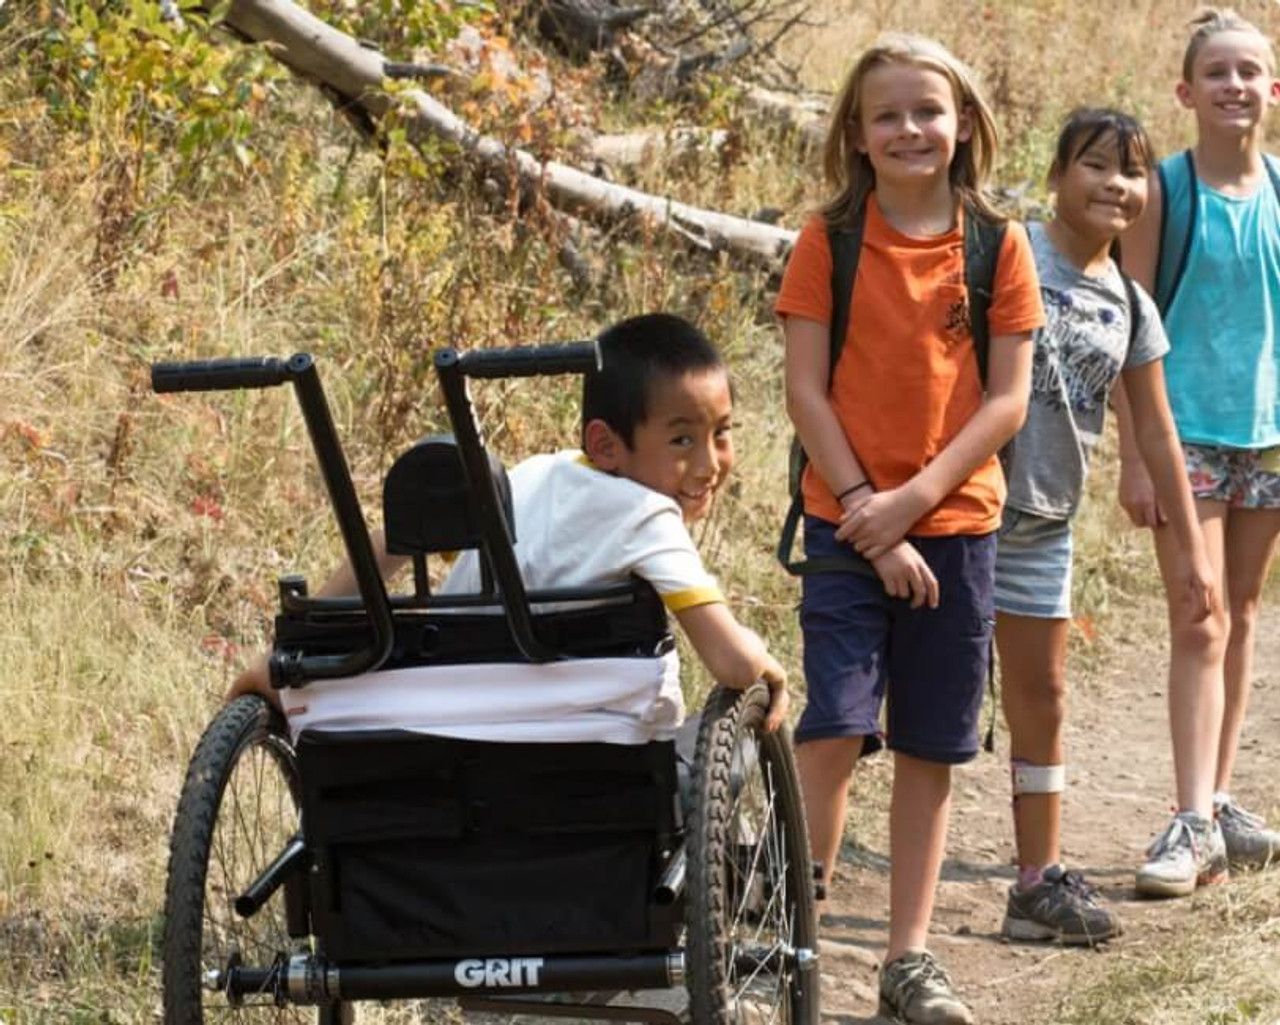 County Passive Parks Purchases  All Terrain Wheelchair For Everyone  to Access and Enjoy County Passive Parks